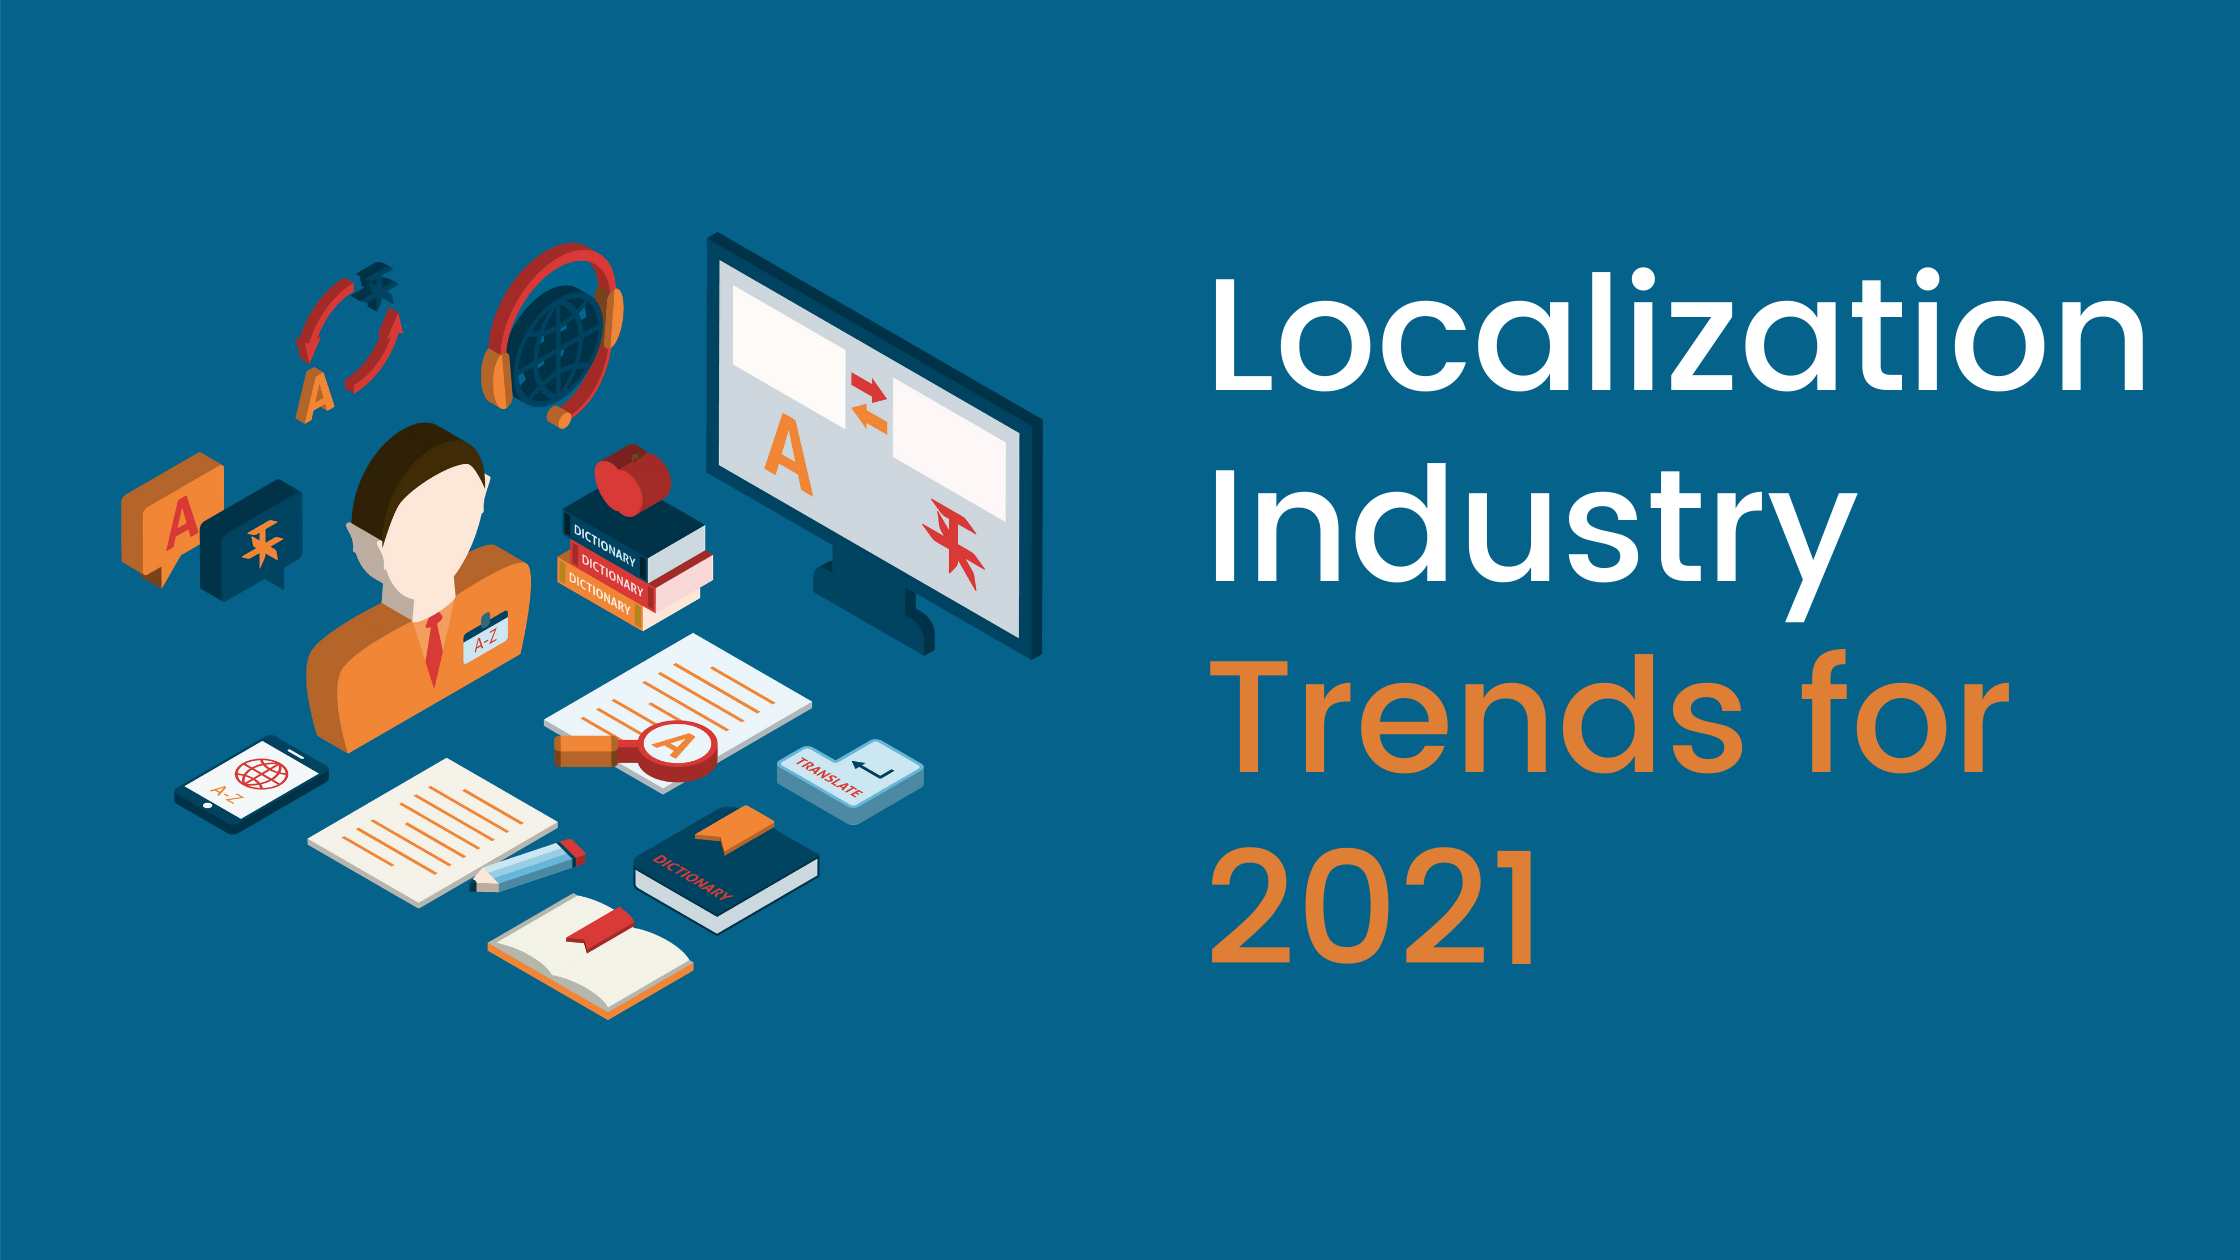 Localization Industry Trends